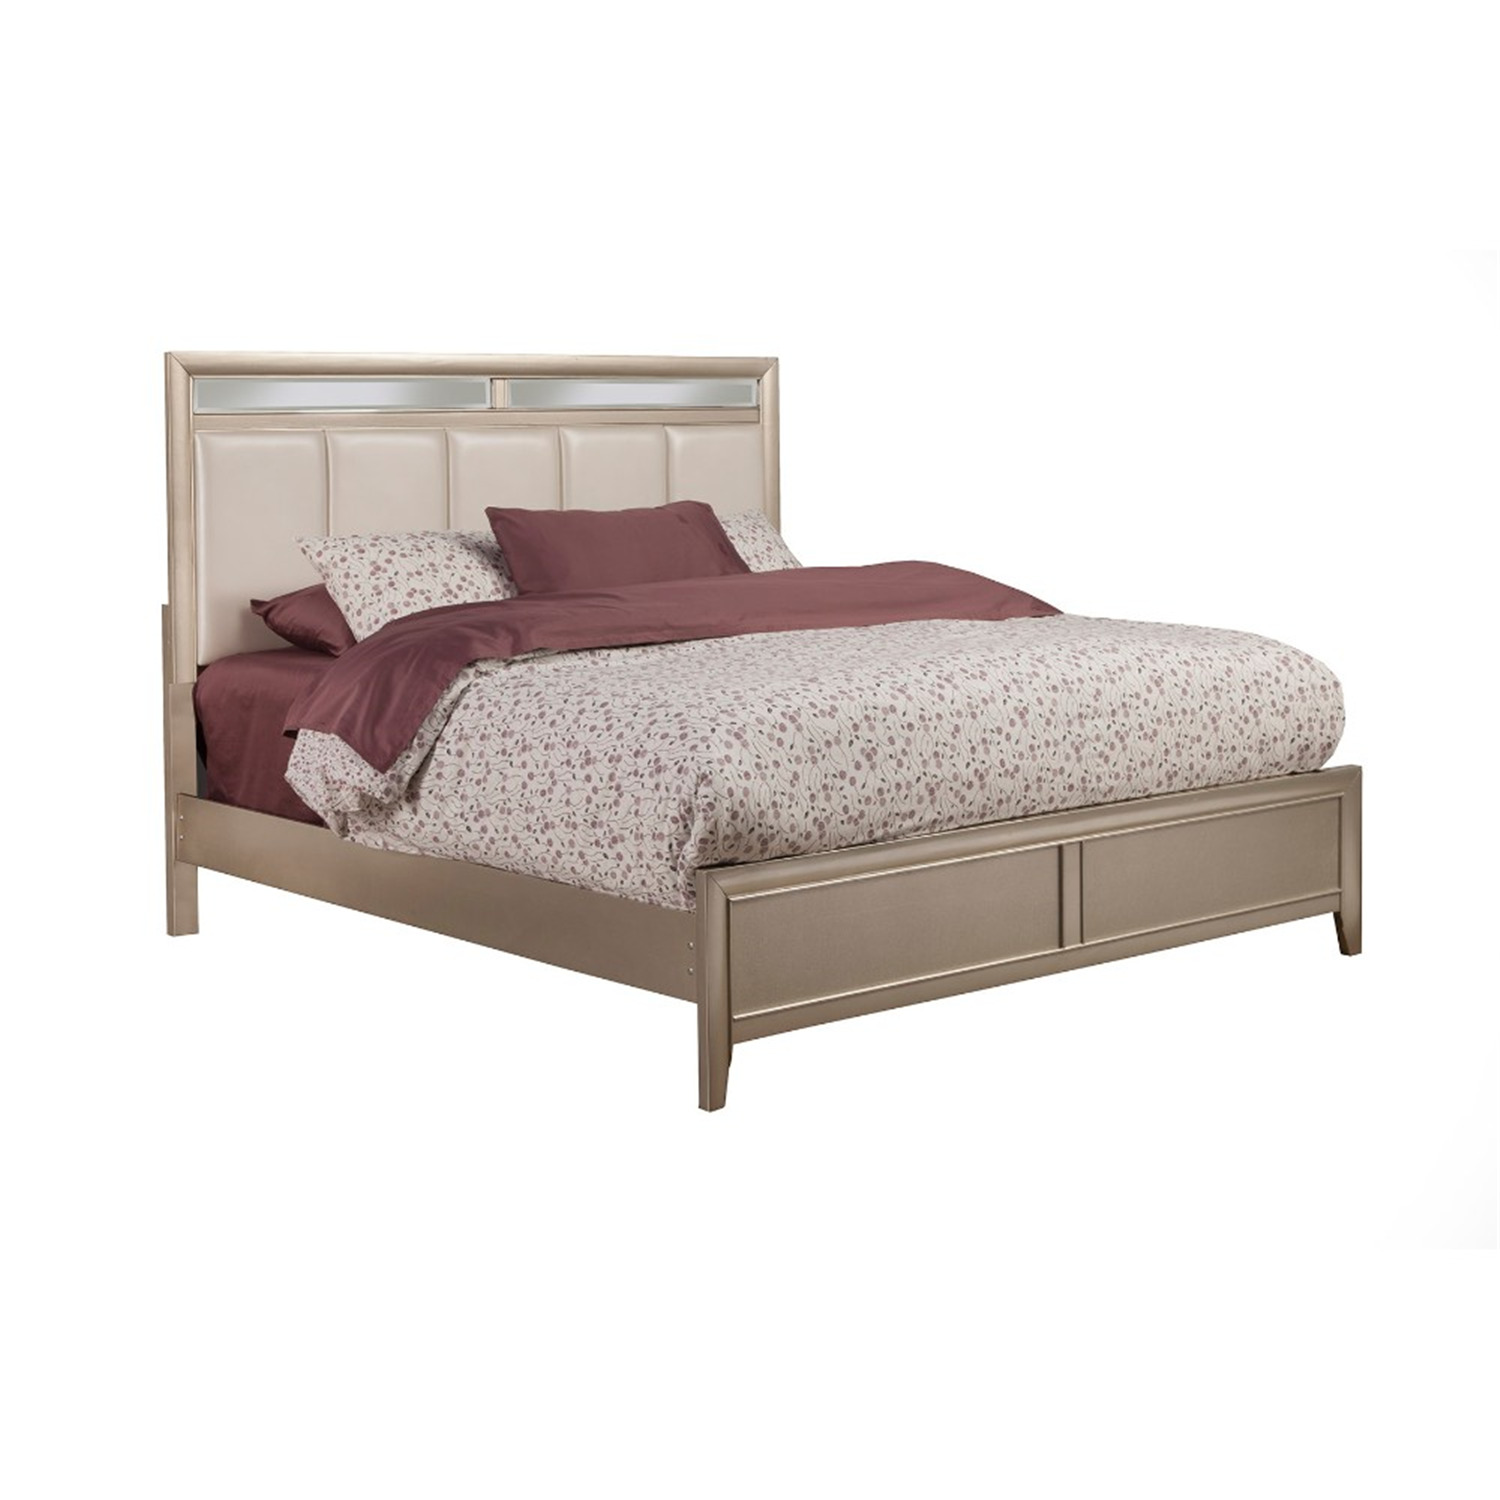 BenJara Pine Wood Queen Size Panel Bed With Upholstered Headboard, Silver - image 2 of 3